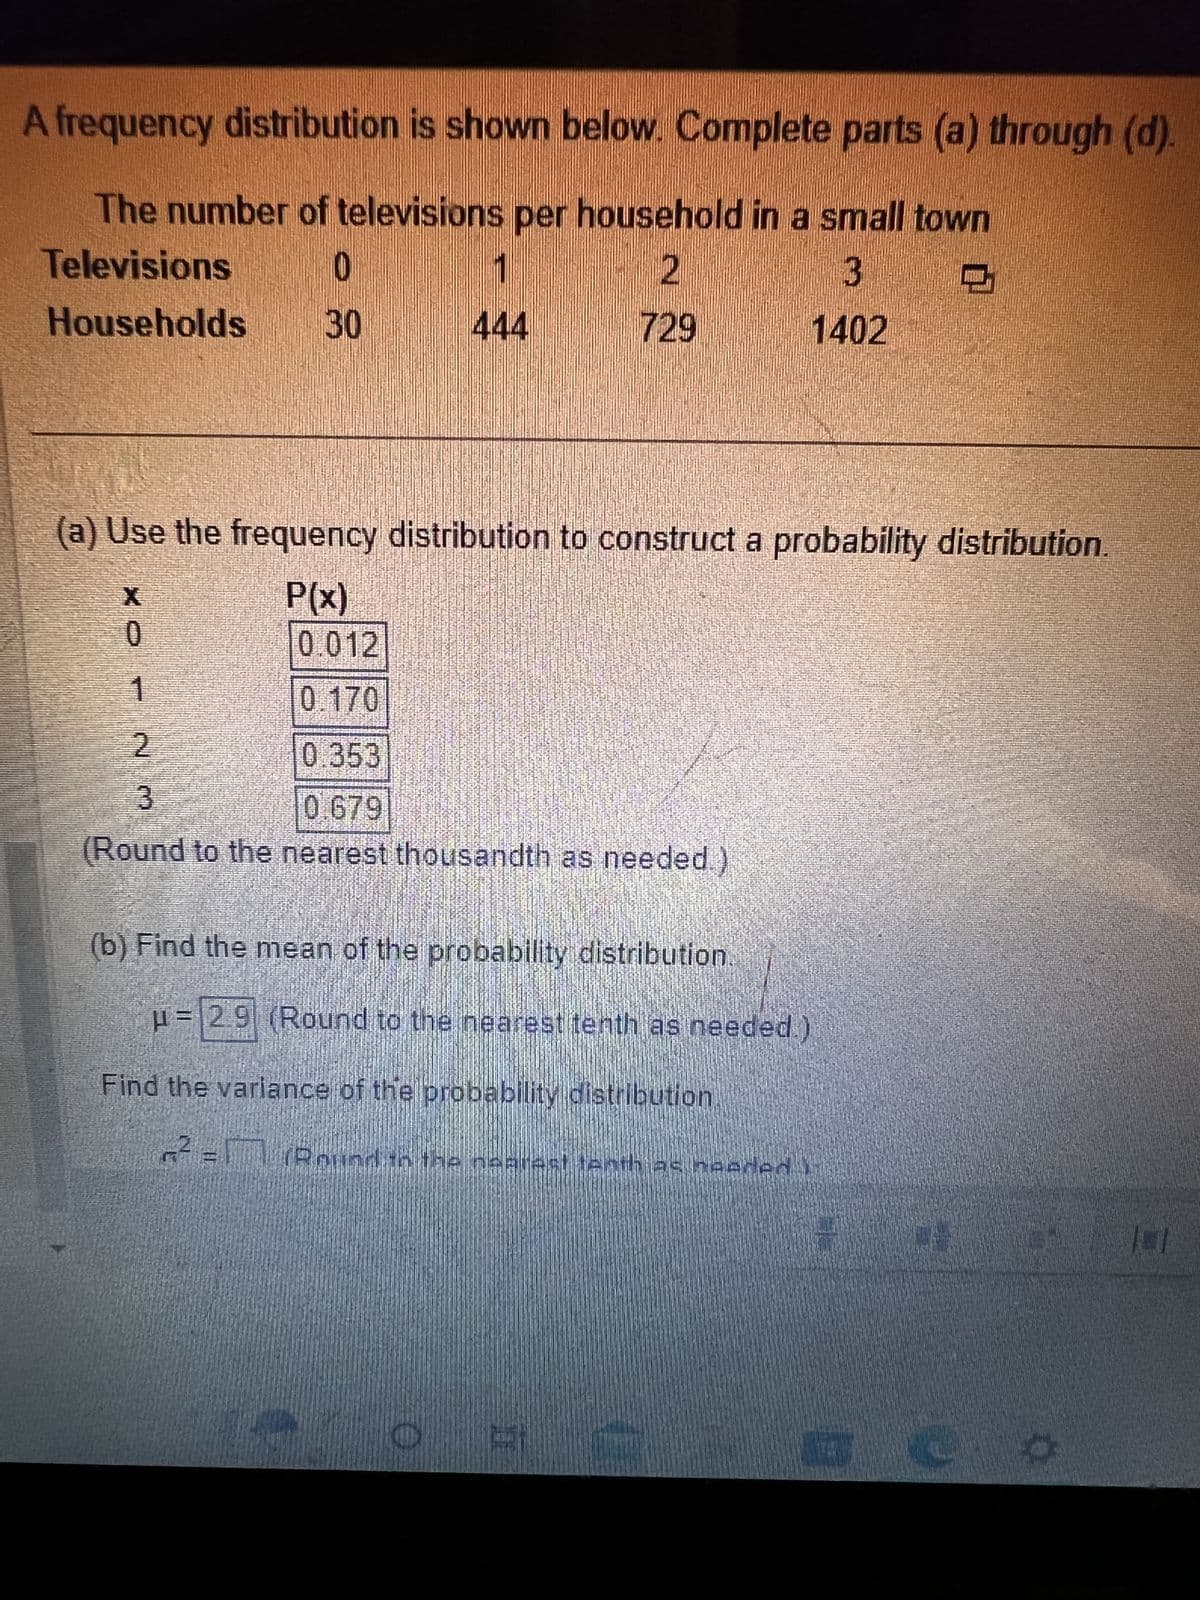 A frequency distribution is shown below. Complete parts (a) through (d).
The number of televisions per household in a small town
Televisions
0
2
3
Households 30
729
1402
(a) Use the frequency distribution to construct a probability distribution.
P(x)
0
1
DUBEN
0.012
119
1
444
0.170
2
0.353
3
0.679
(Round to the nearest thousandth as needed.)
(b) Find the mean of the probability distribution.
H = 29 (Round to the nearest tenth as needed.)
Find the variance of the probability distribution
2²=17 Round in the nearest tenth as needed i
To
101
B
W
O